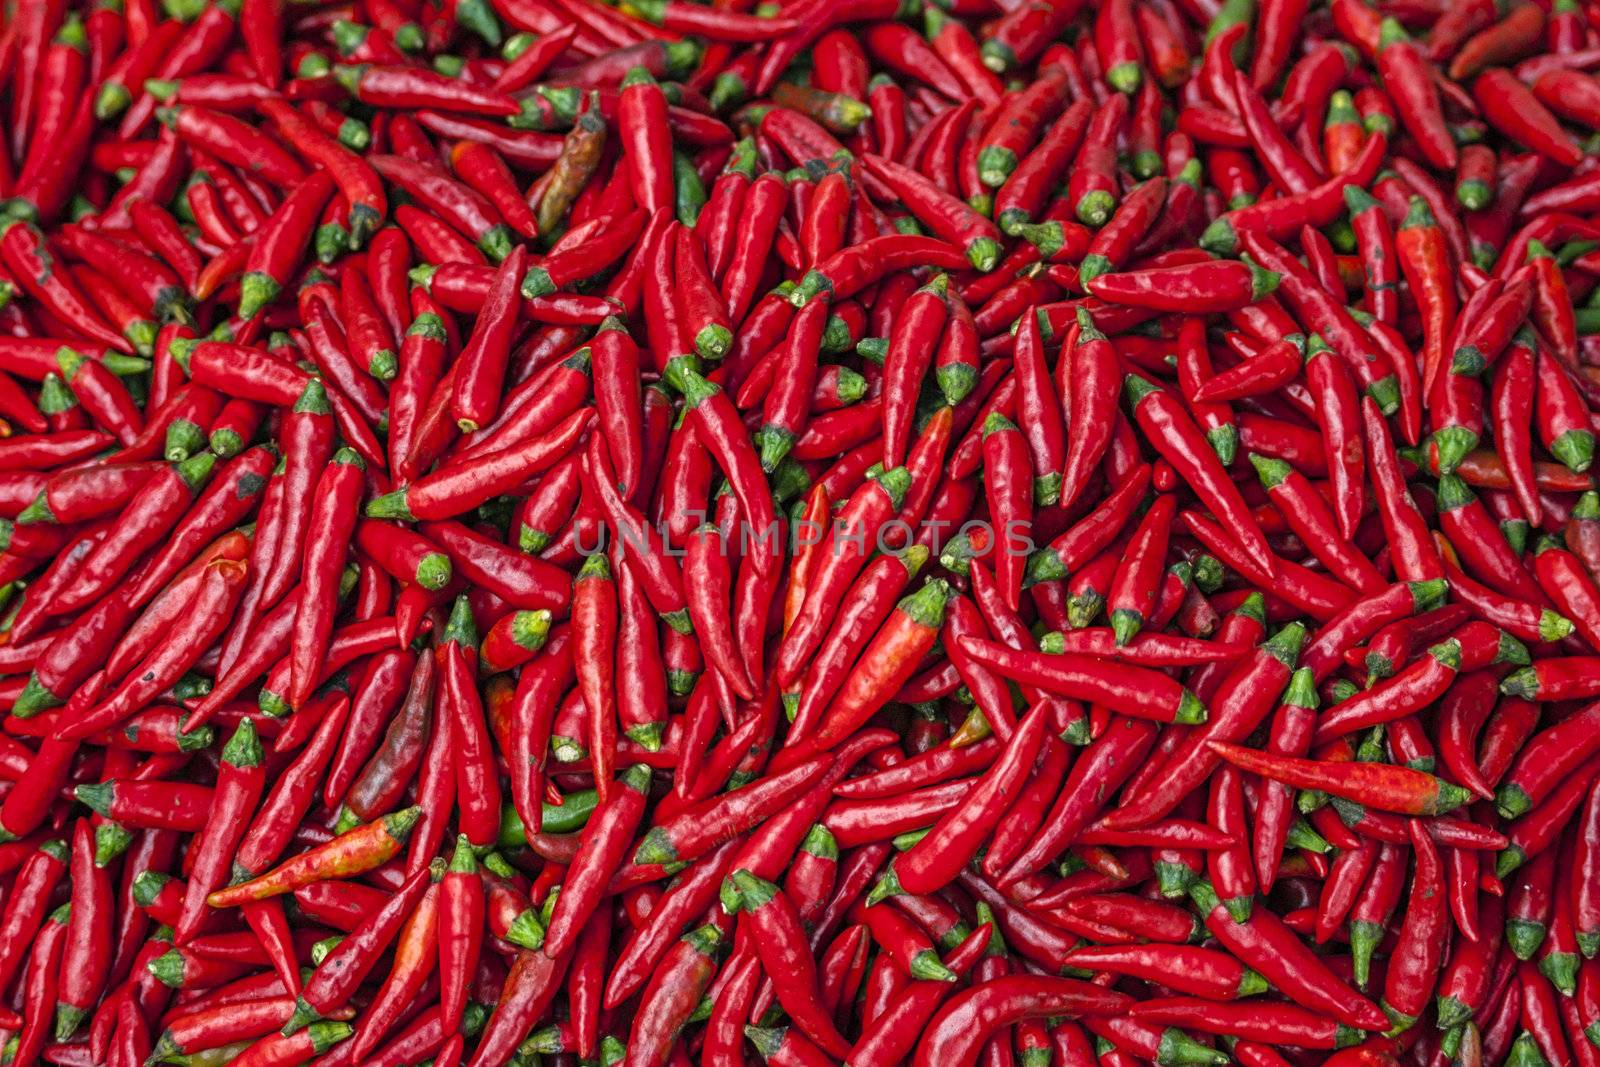 Vietnam Bac Ha: Pigment red hot jalapeno chili peppers by Claudine